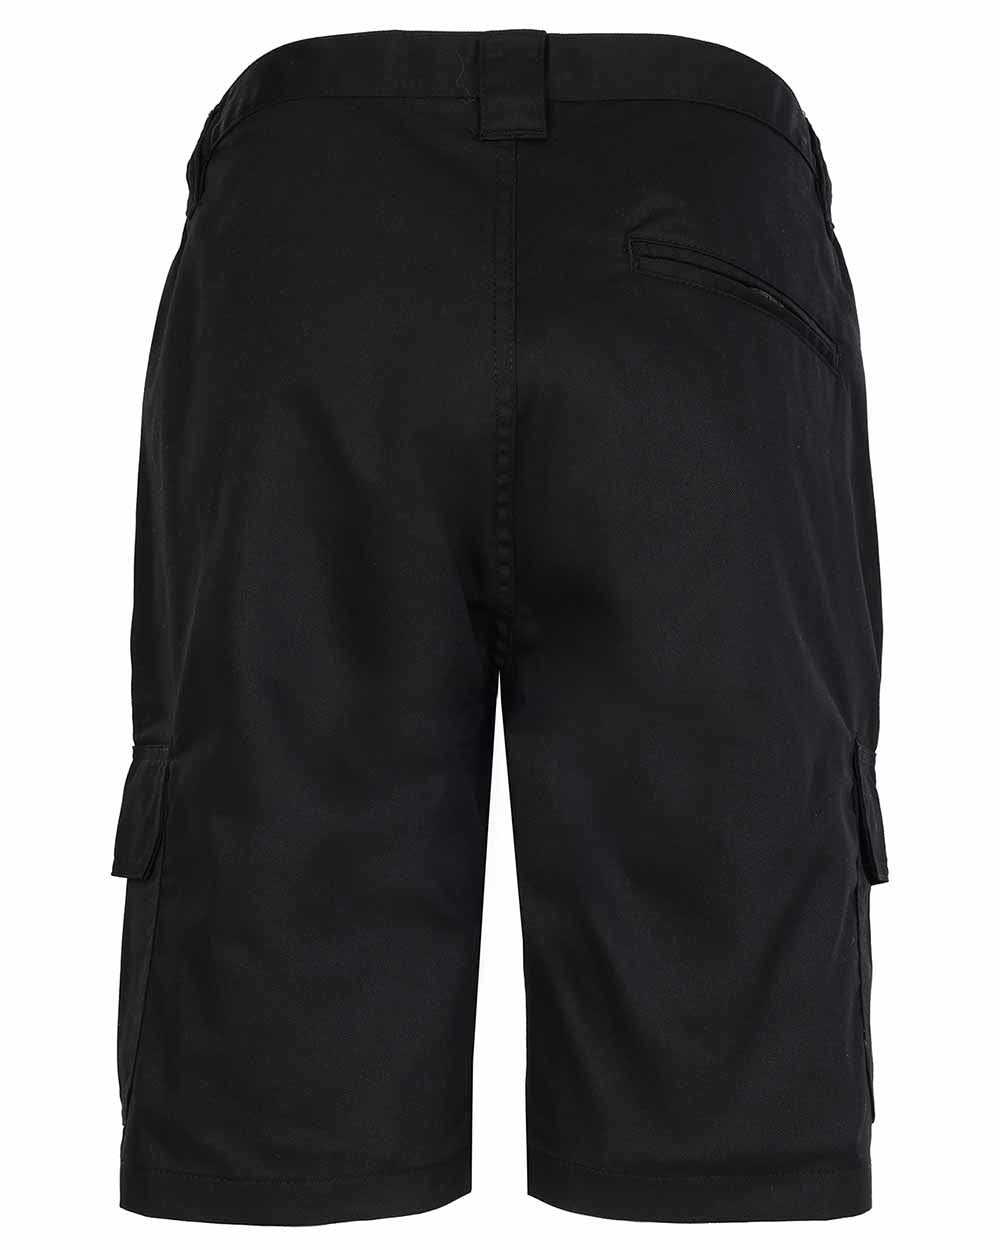 BAck view Fort Workforce Shorts in Black 